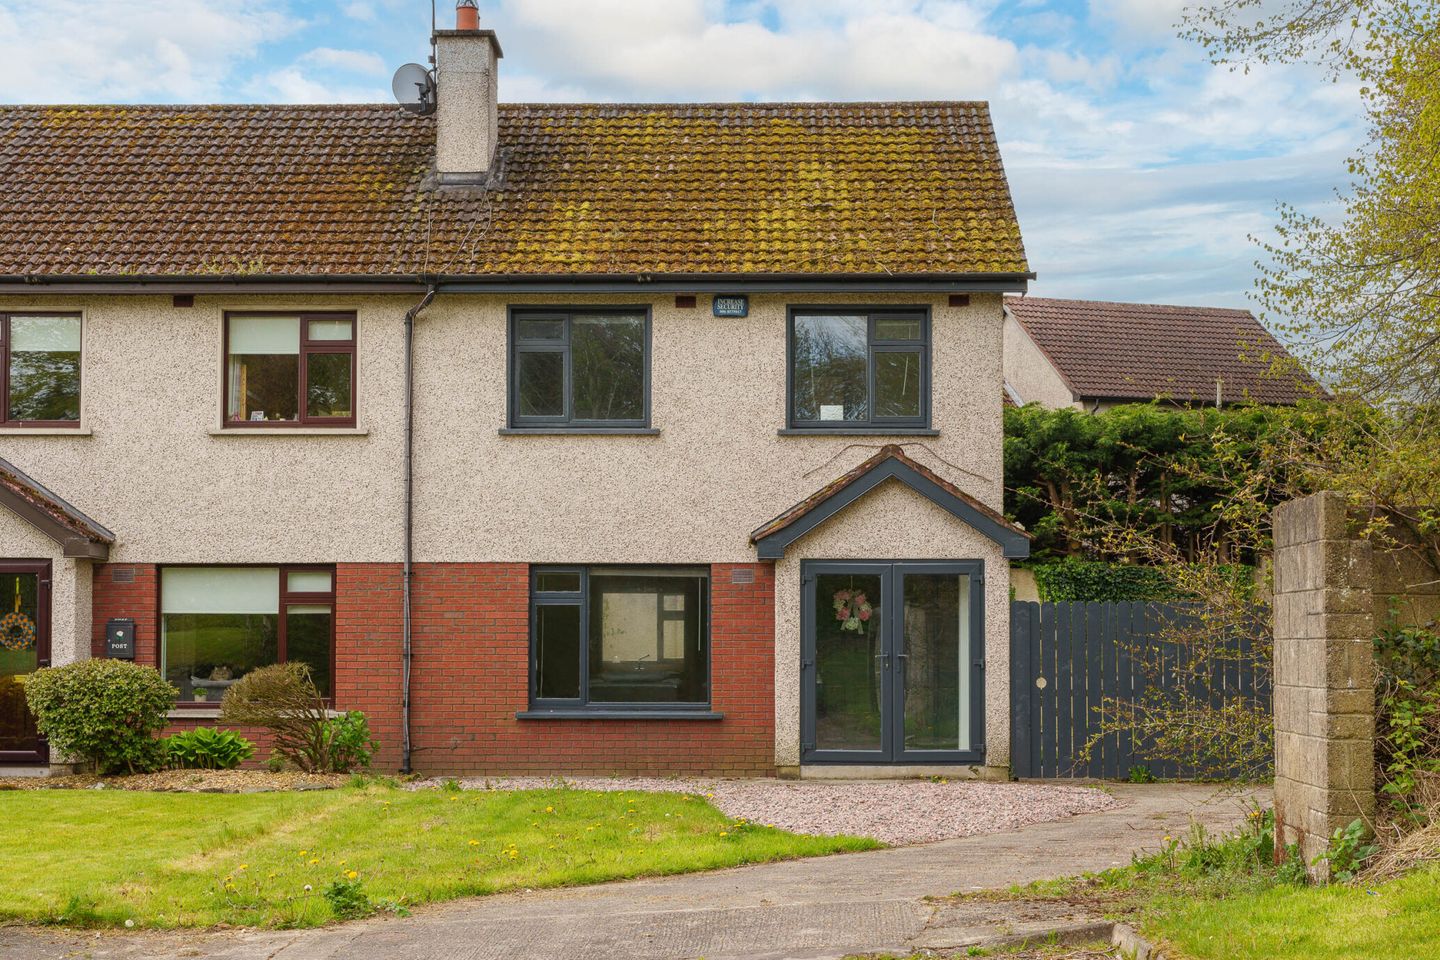 1 Castle Heights, Castletown Road, Dundalk, Co. Louth, A91R27C